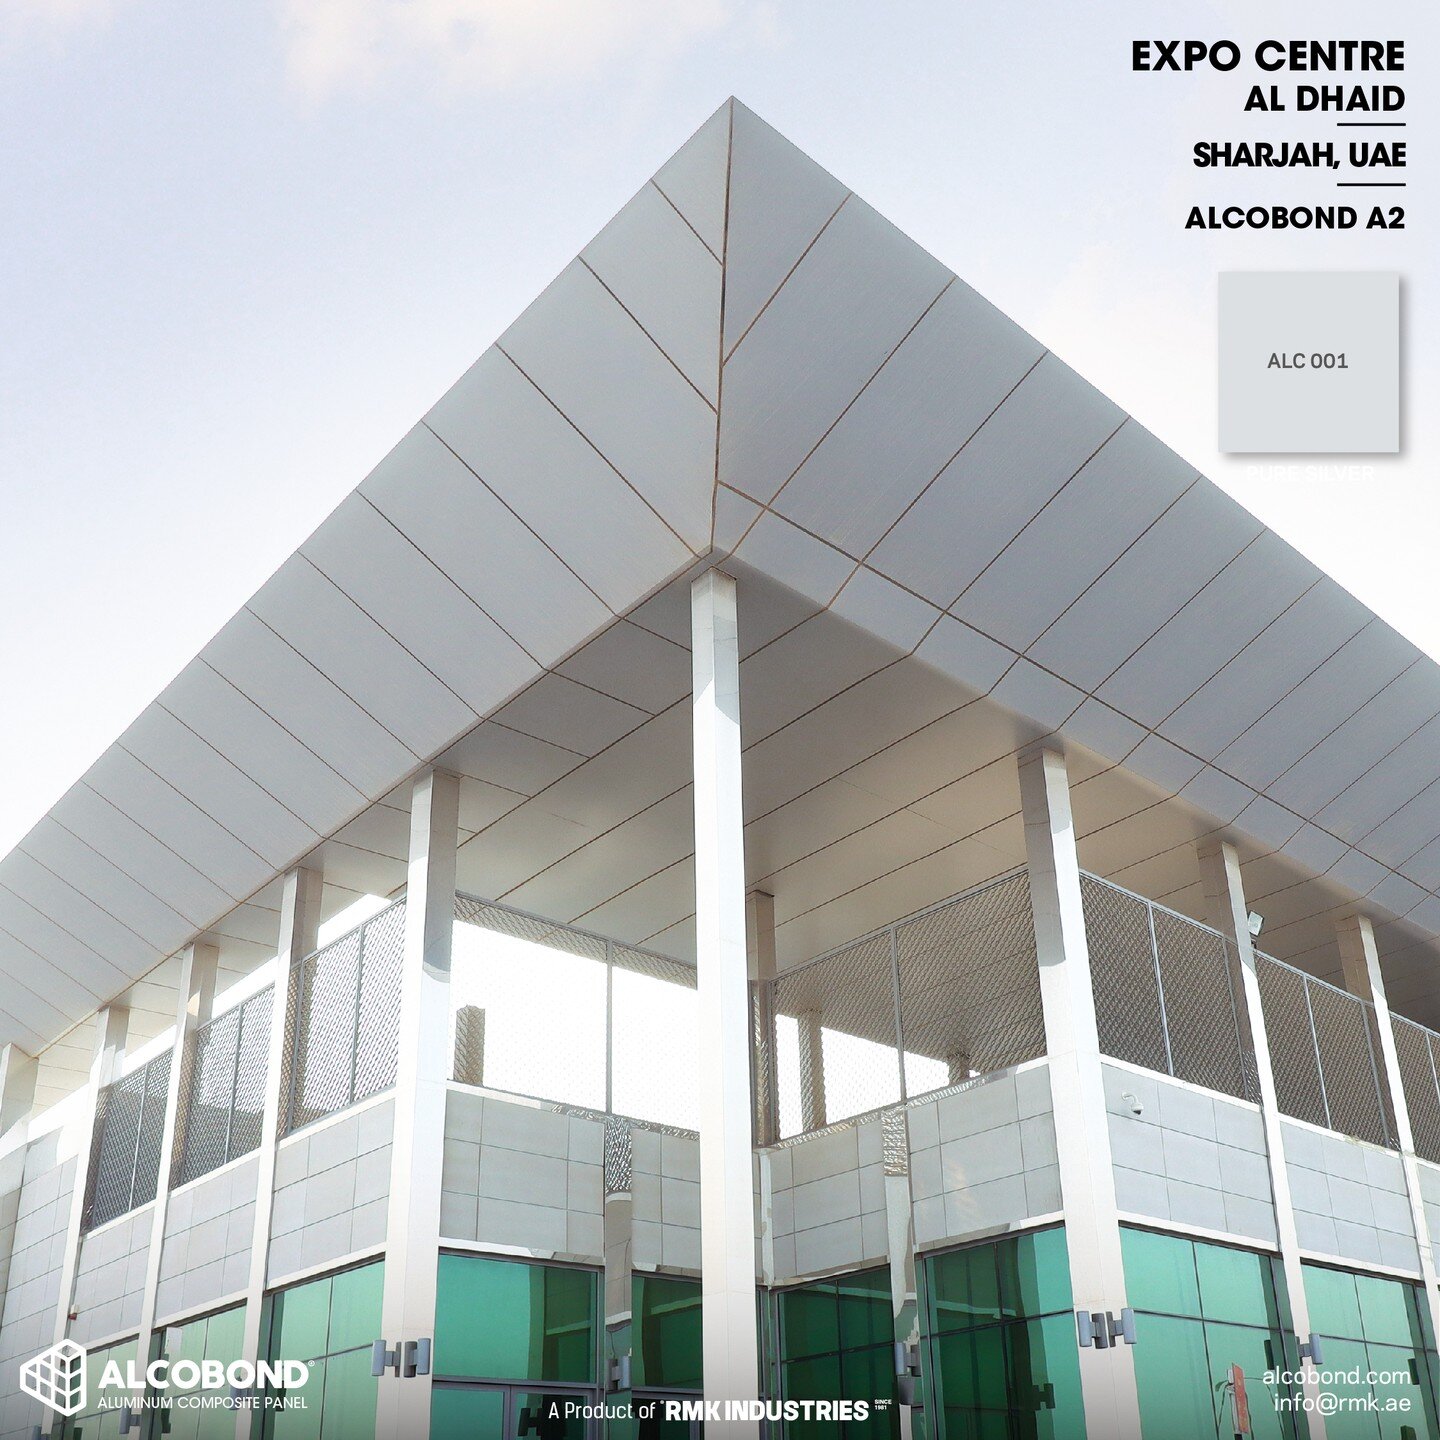 #ProjectSeries

On display is our beautiful Pure Silver (ALC 001) finish, part of our Metallic Series. This finish was installed on the newest #ExpoCentre located in Al Dhaid, #Sharjah.

The Metallic Series offers expressive colors across the spectru